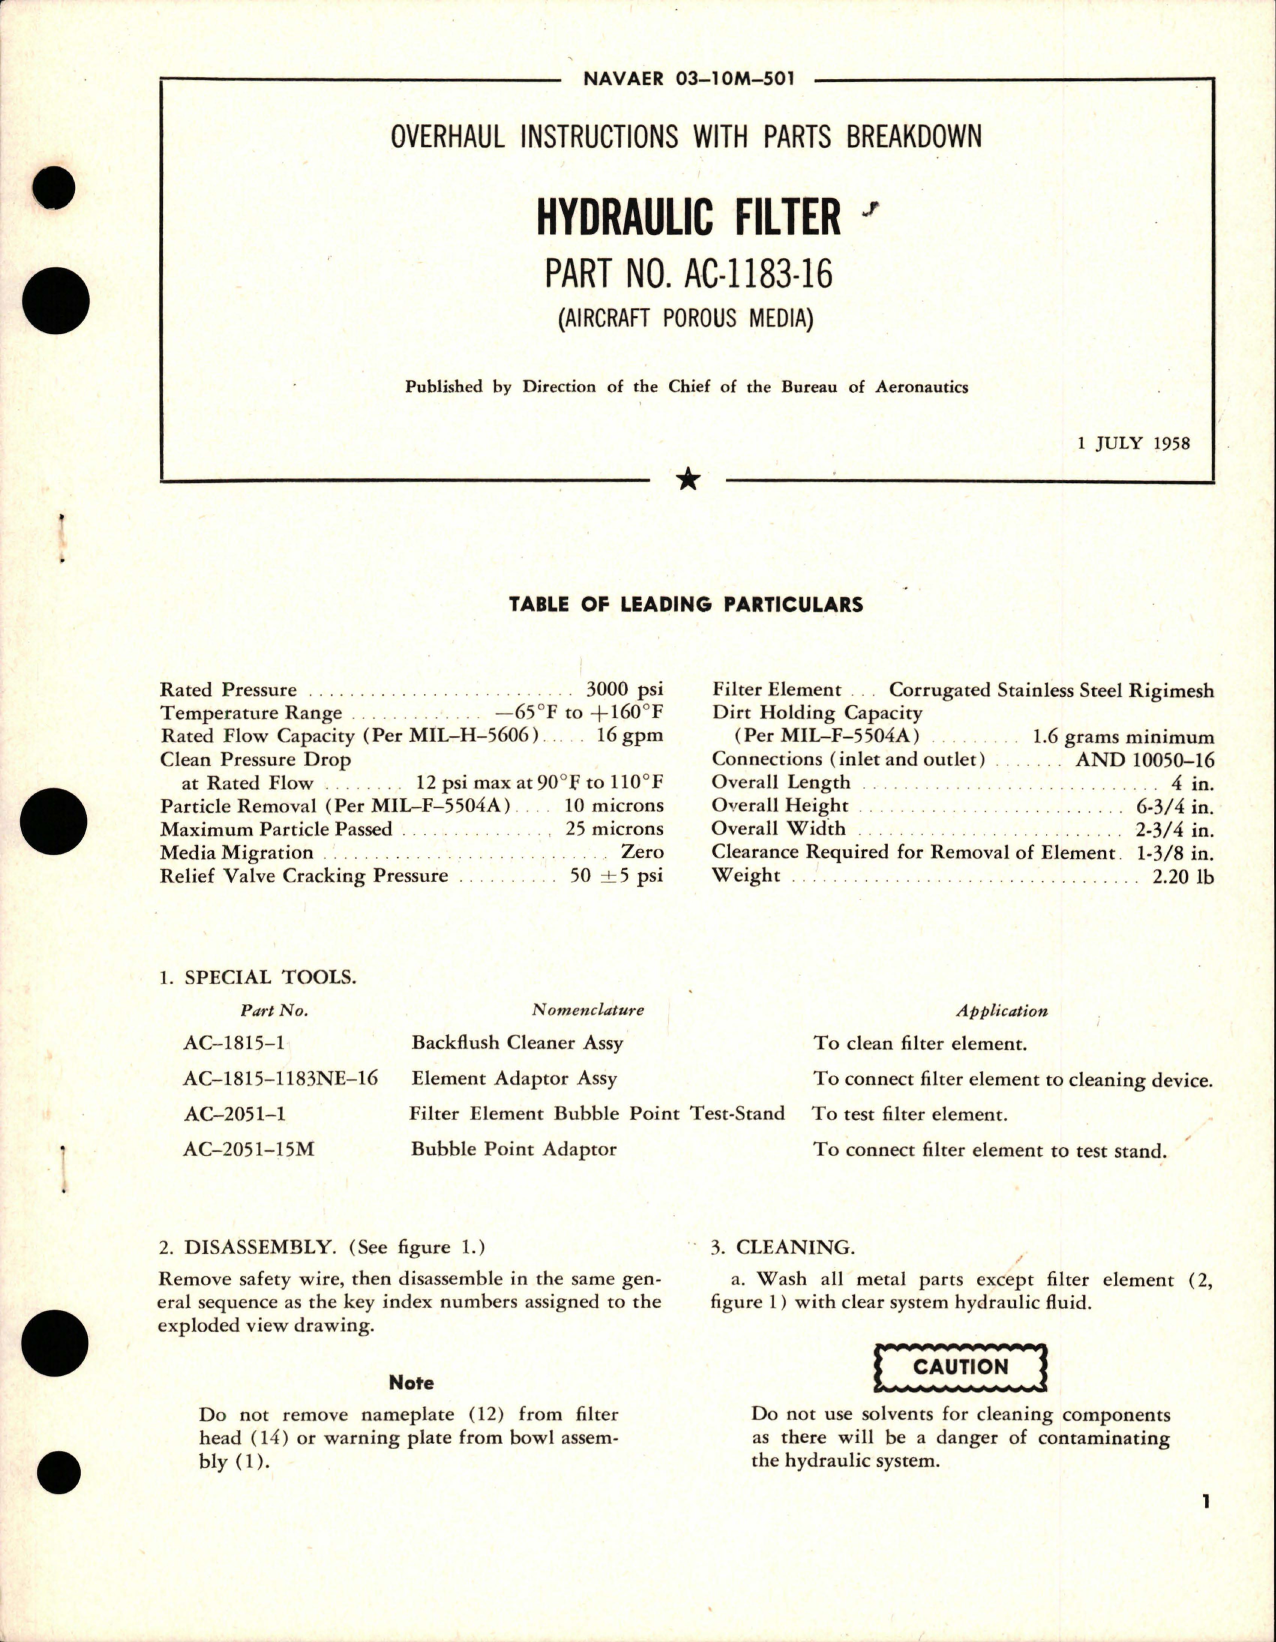 Sample page 1 from AirCorps Library document: Overhaul Instructions with Parts Breakdown for Hydraulic Filter - Part AC-1183-16 